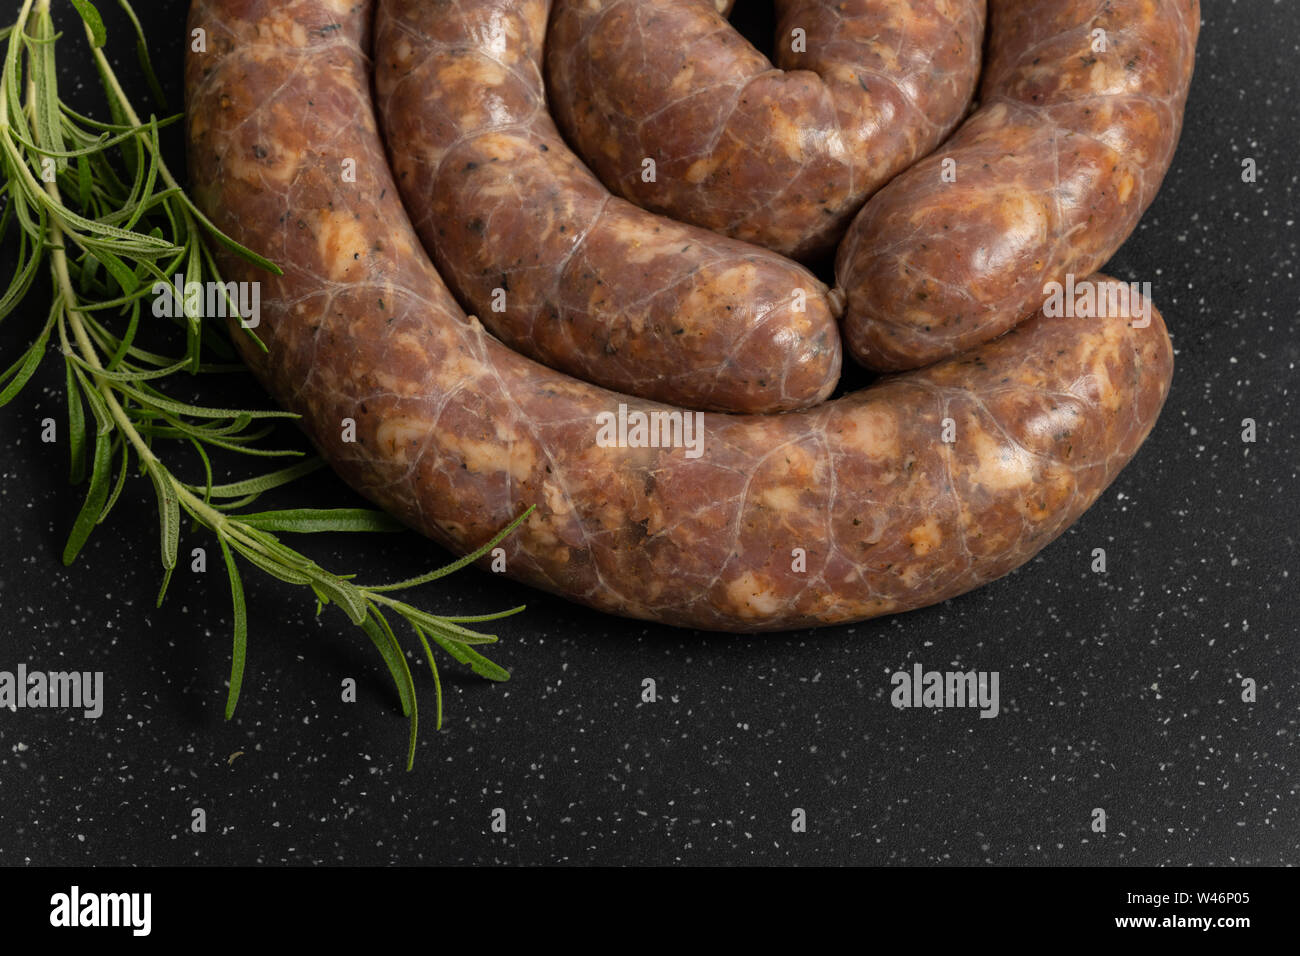 Raw homemade stuffed pork sausages and rosmarin isolated on a black background. Stock Photo